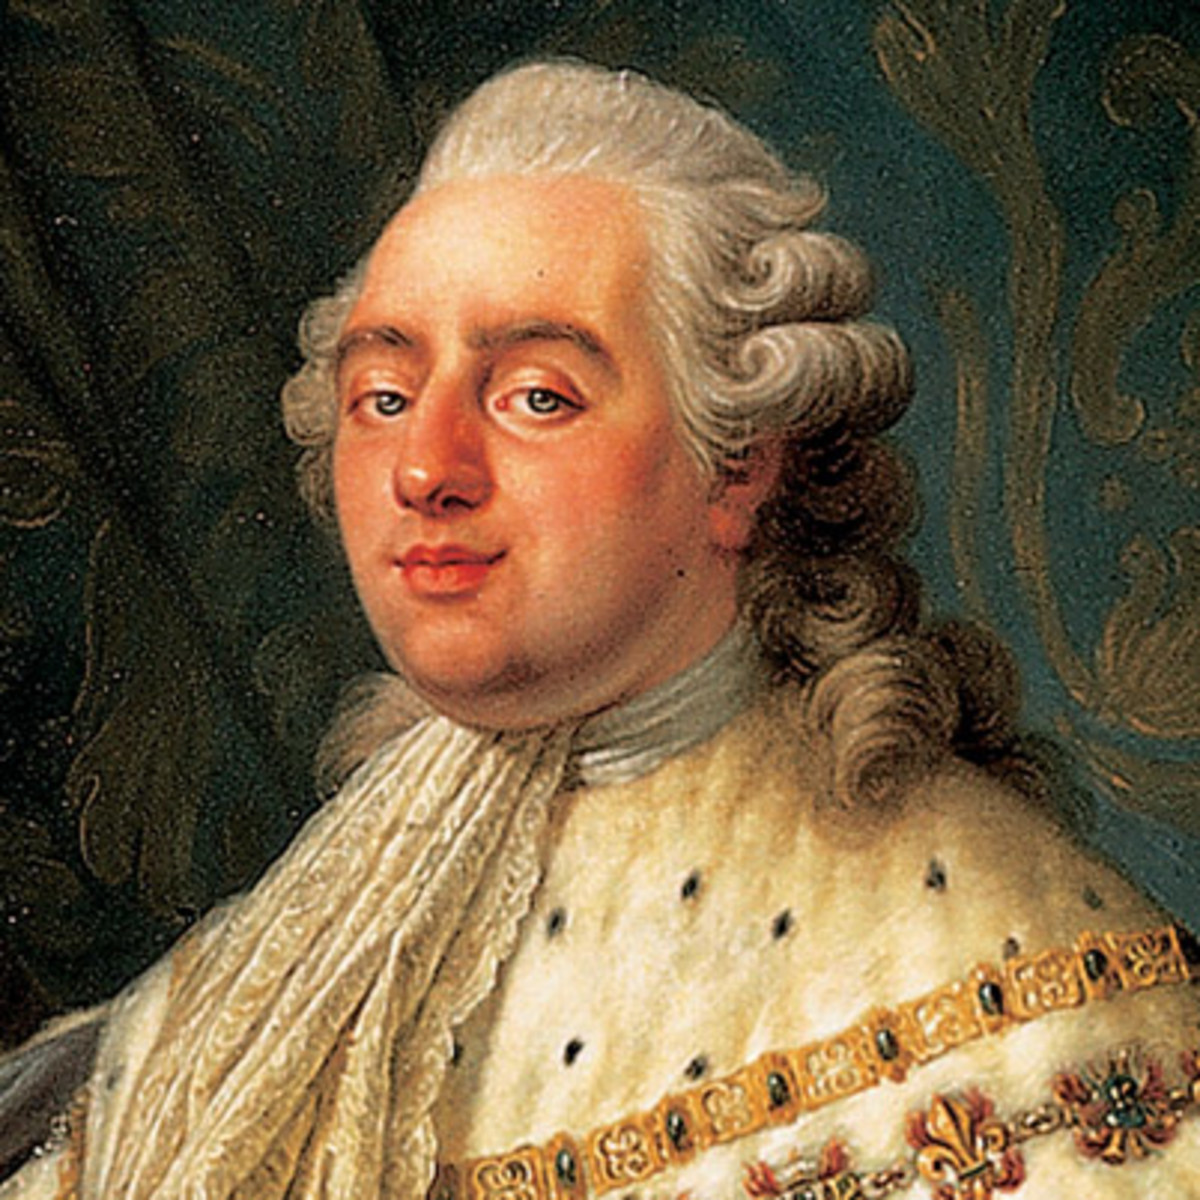 A painting of King Louis XVI.